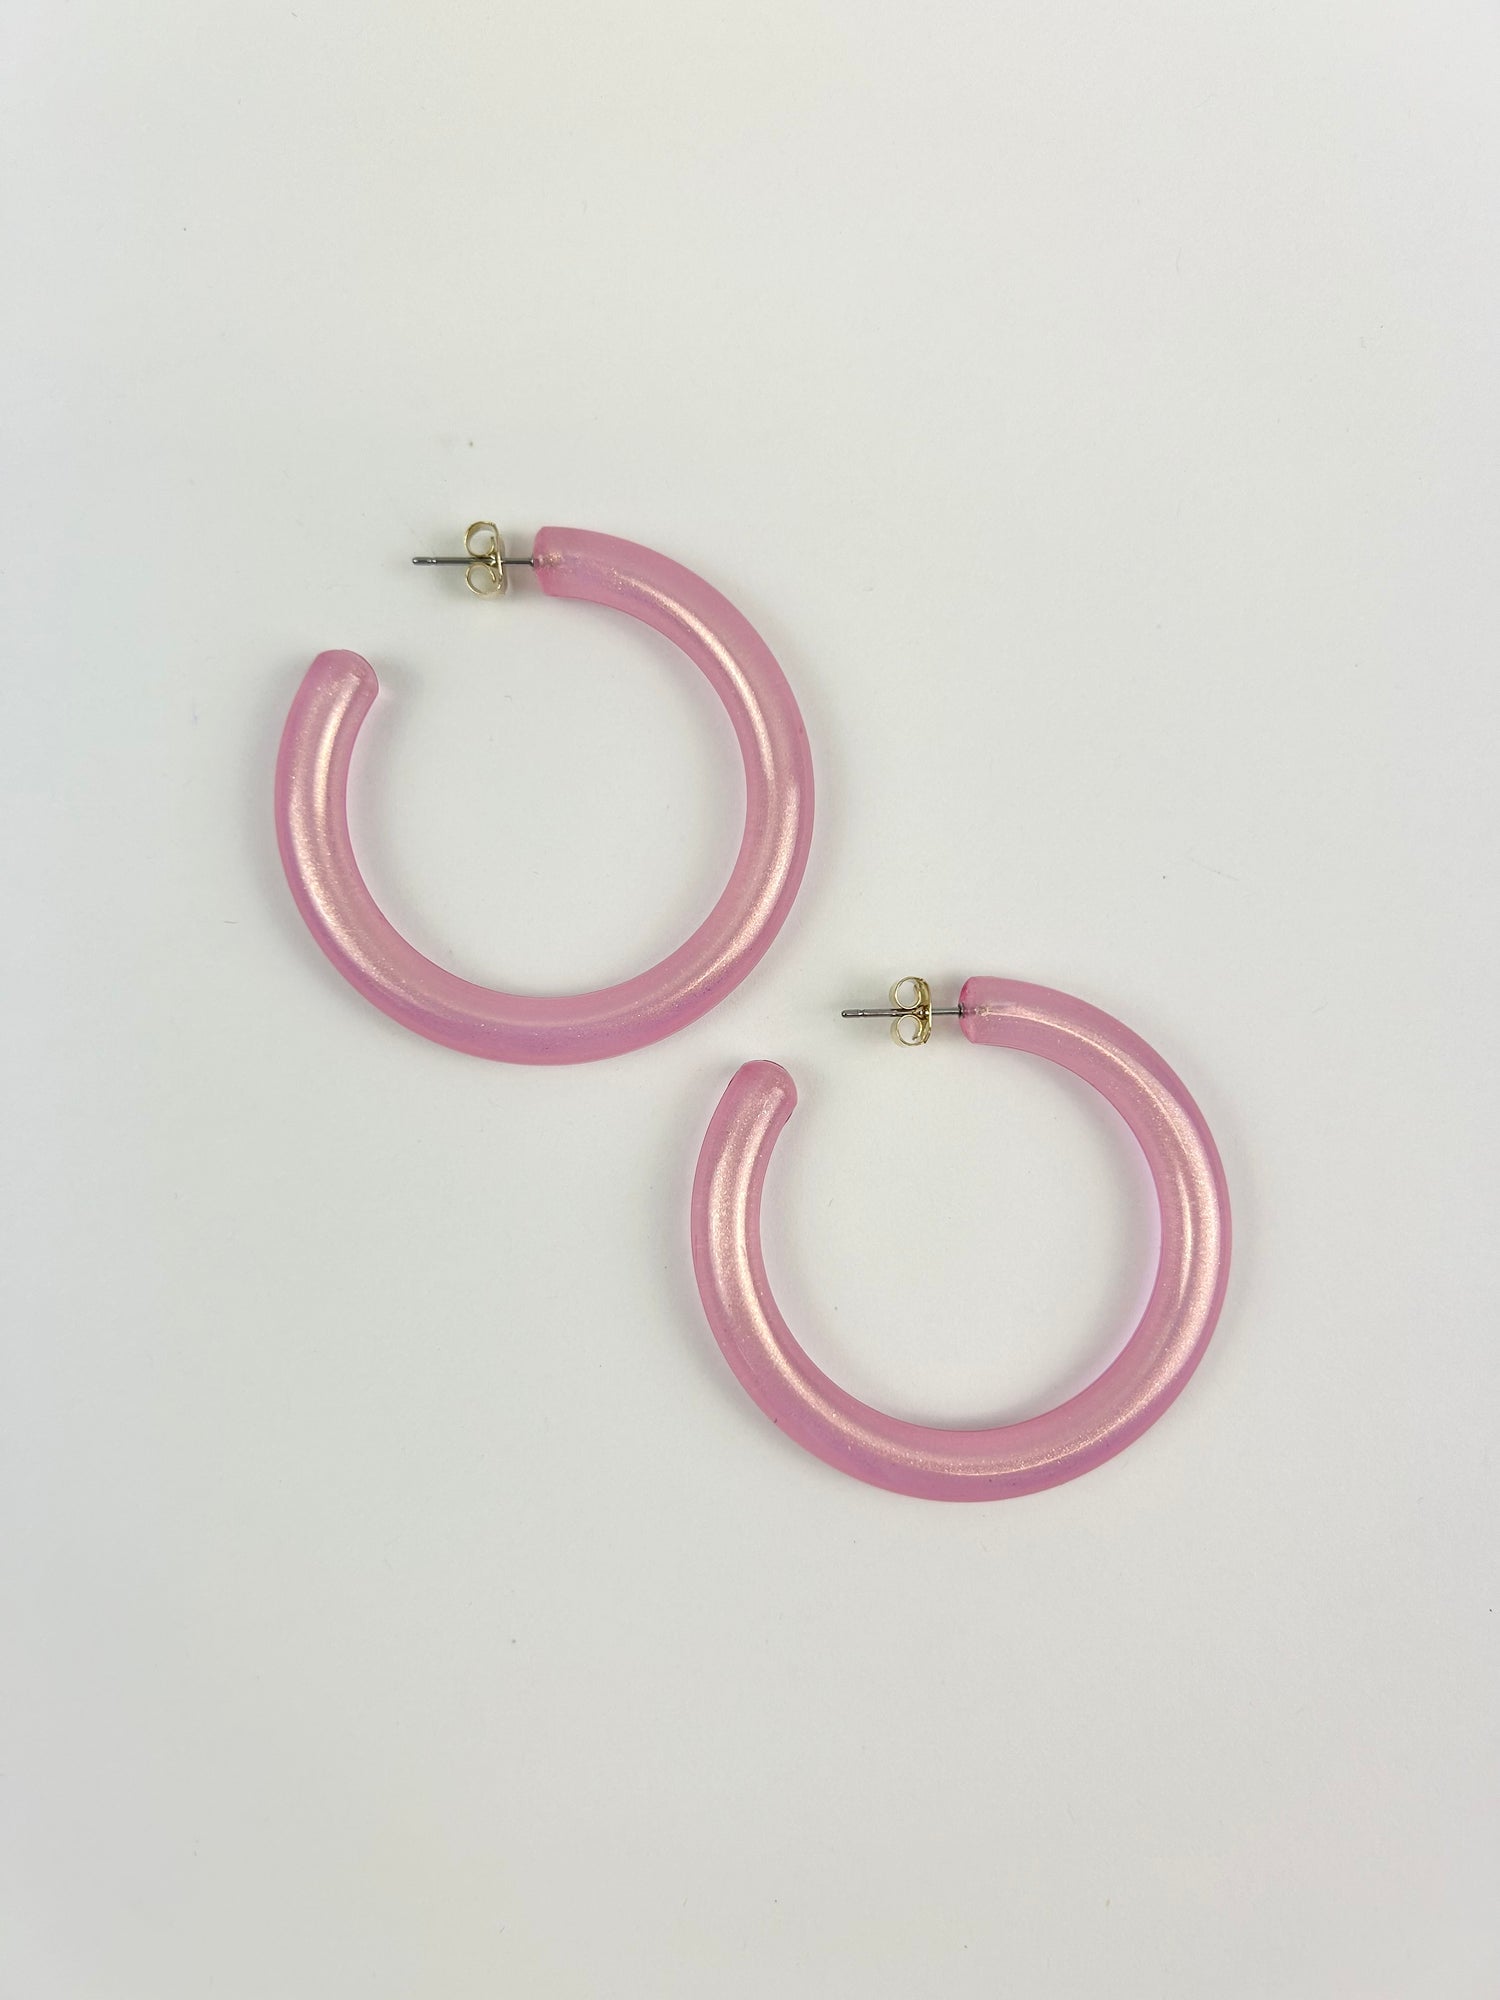 Iridescent Pink Shimmer Hoops Earrings in  at Wrapsody